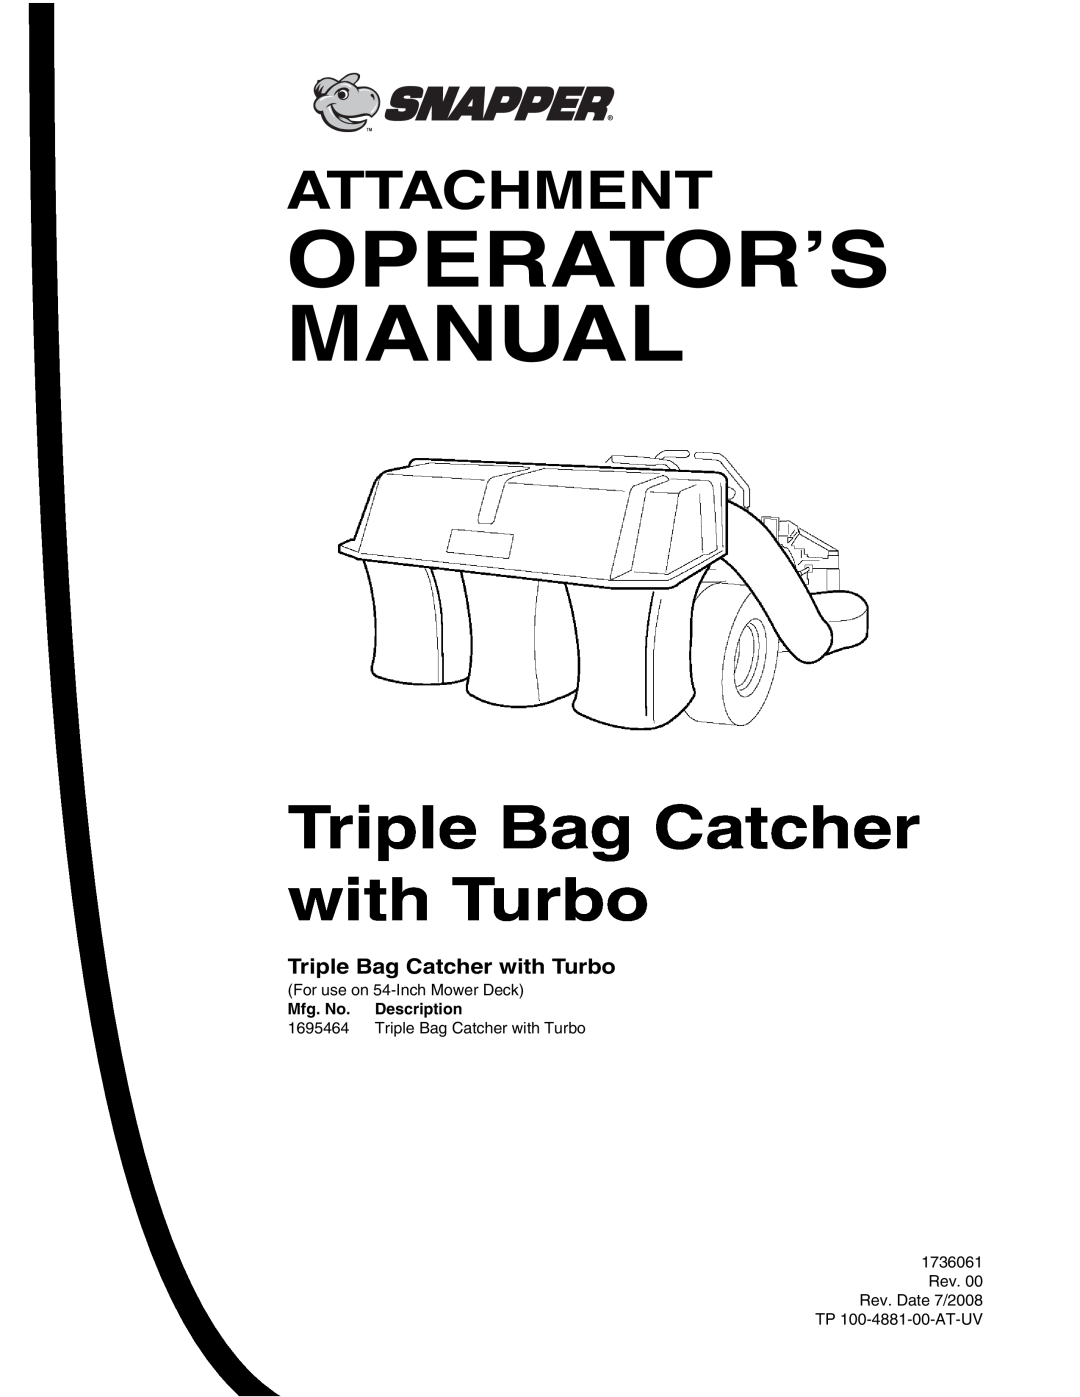 Snapper 1695464 manual Operator’S Manual, Triple Bag Catcher with Turbo, Attachment, For use on 54-InchMower Deck 